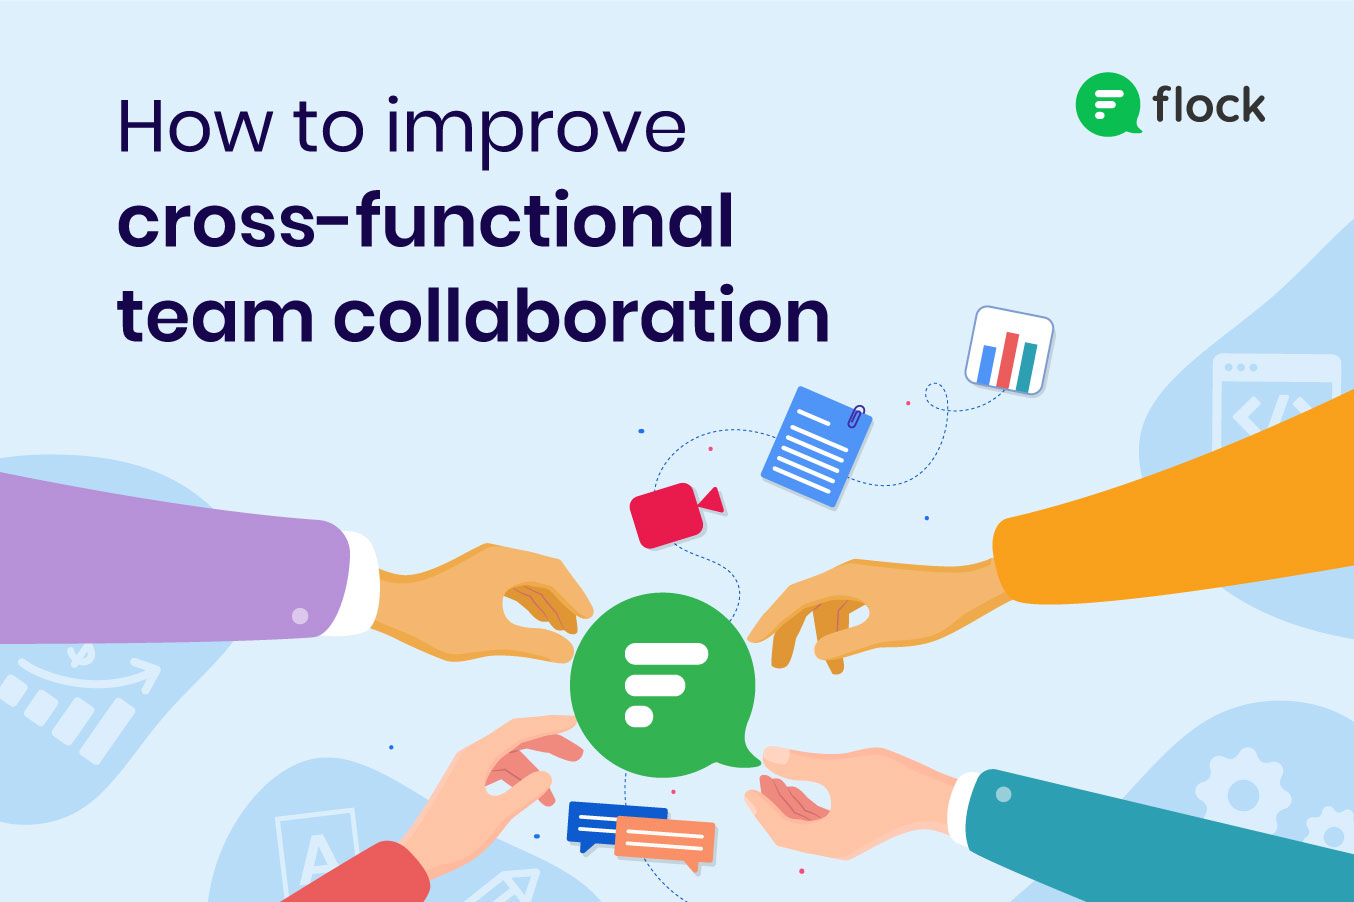 How to improve crossfunctional collaboration in your organization